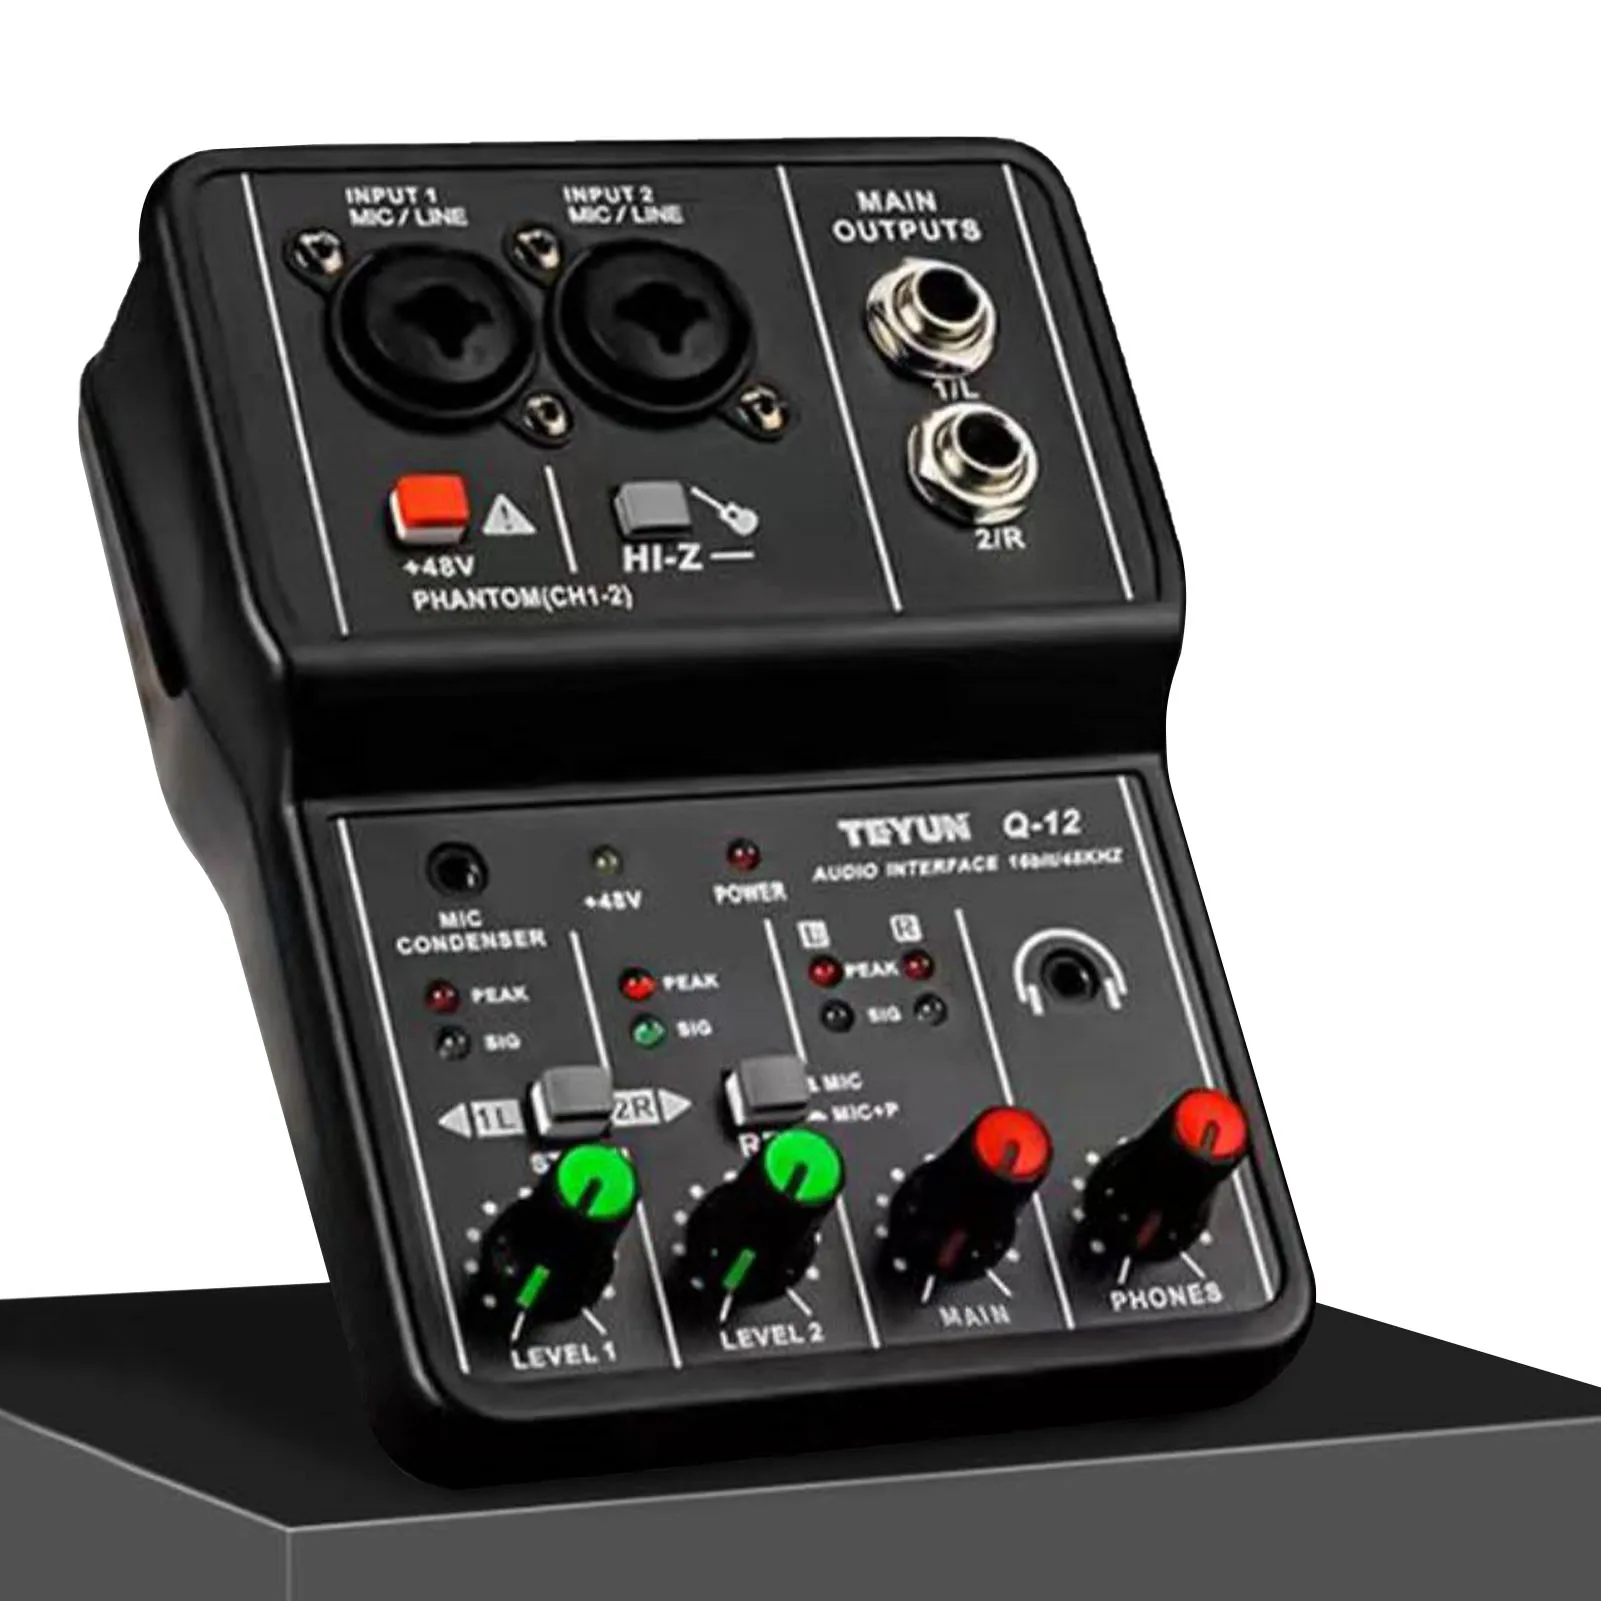 

Mixer Sound Card Stable Live Sound Card Effects Board Mixer Audio Live Broadcast KTV Sound Card With Great Compatibility